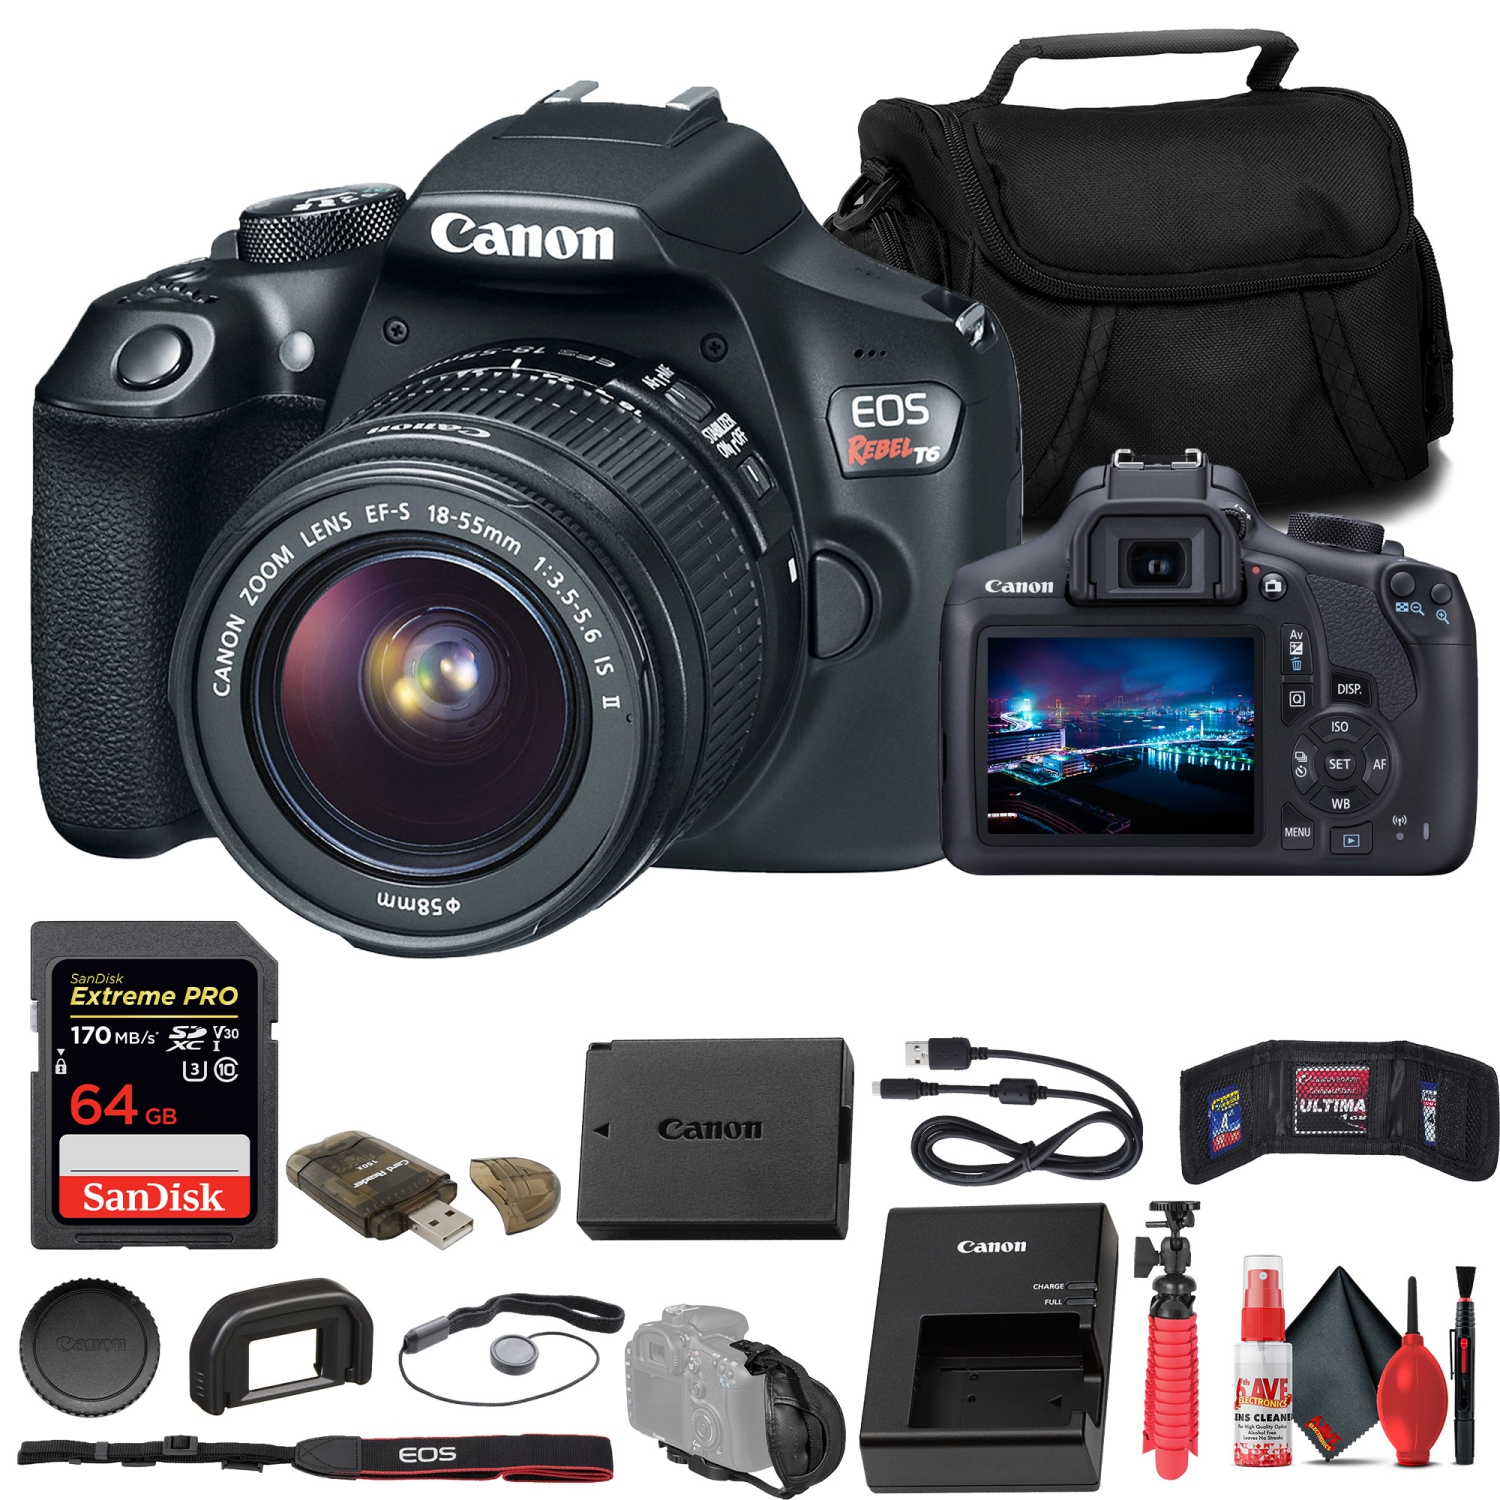 Canon EOS Rebel T6 DSLR Camera W/ 18-55mm Lens + 64GB Card + Cleaning Kit + More